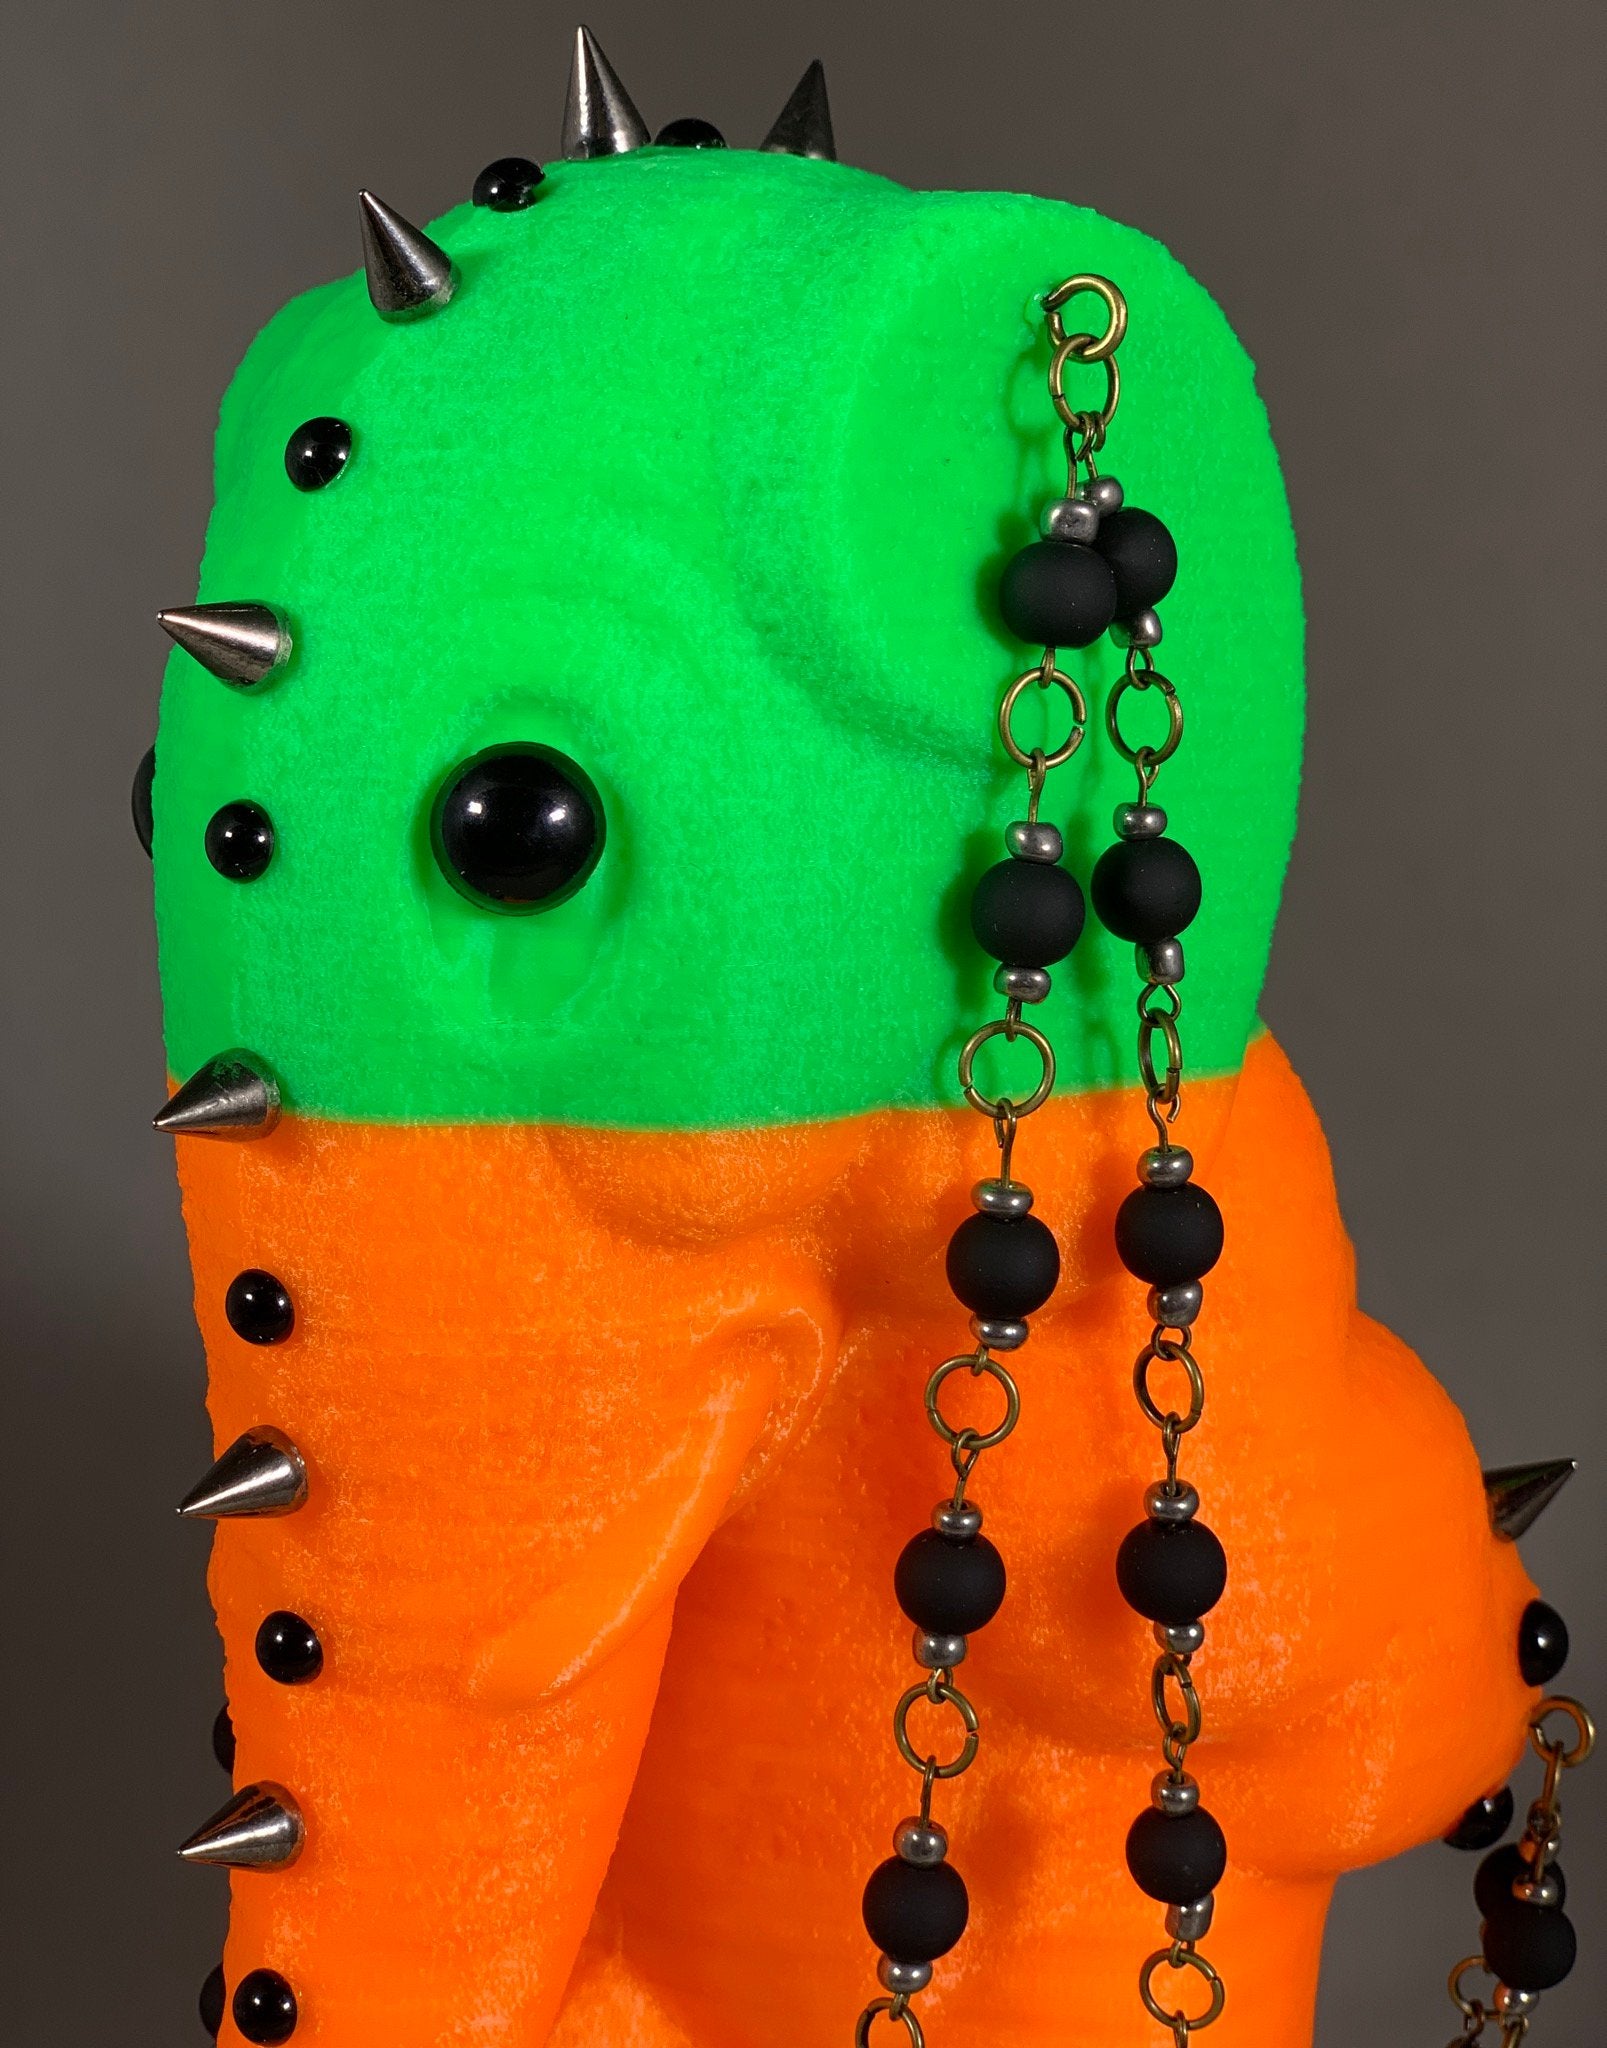 Fluorescent Green and Orange Elephant with Black Beaded Chain